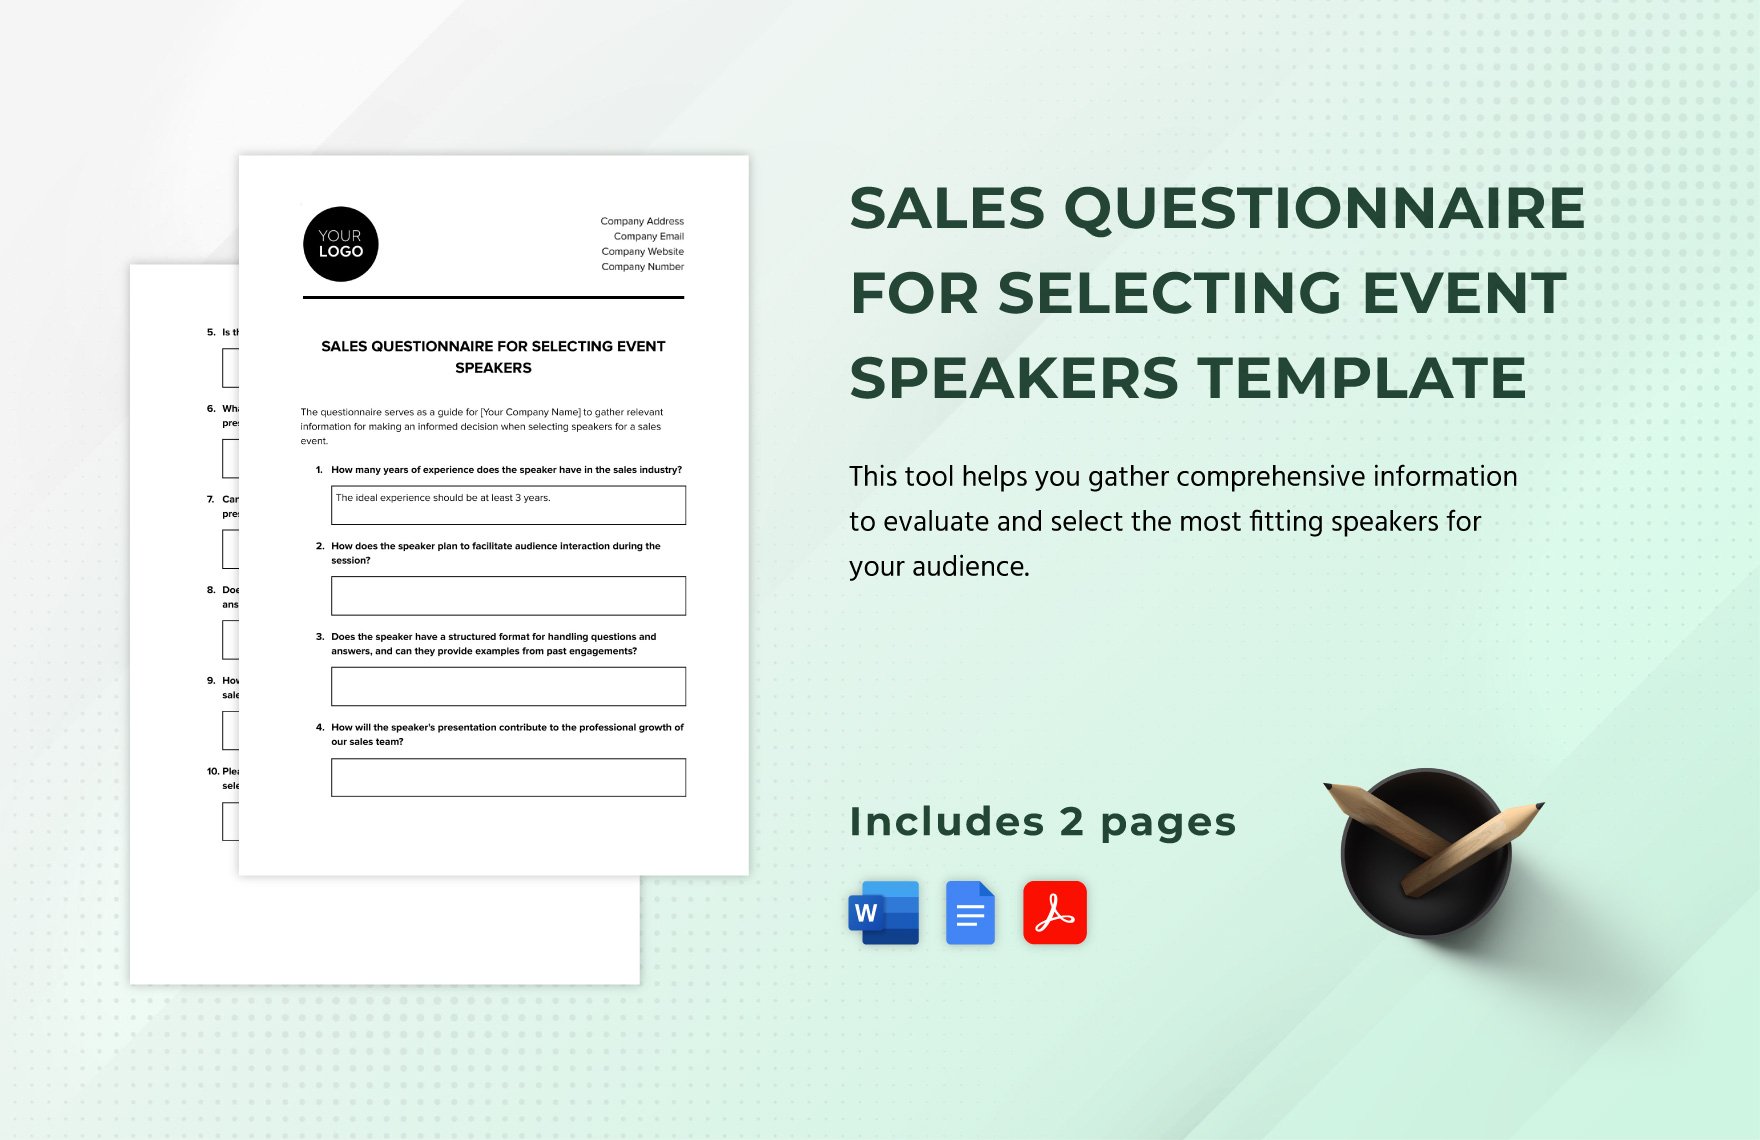 Sales Questionnaire for Selecting Event Speakers Template in Word, Google Docs, PDF